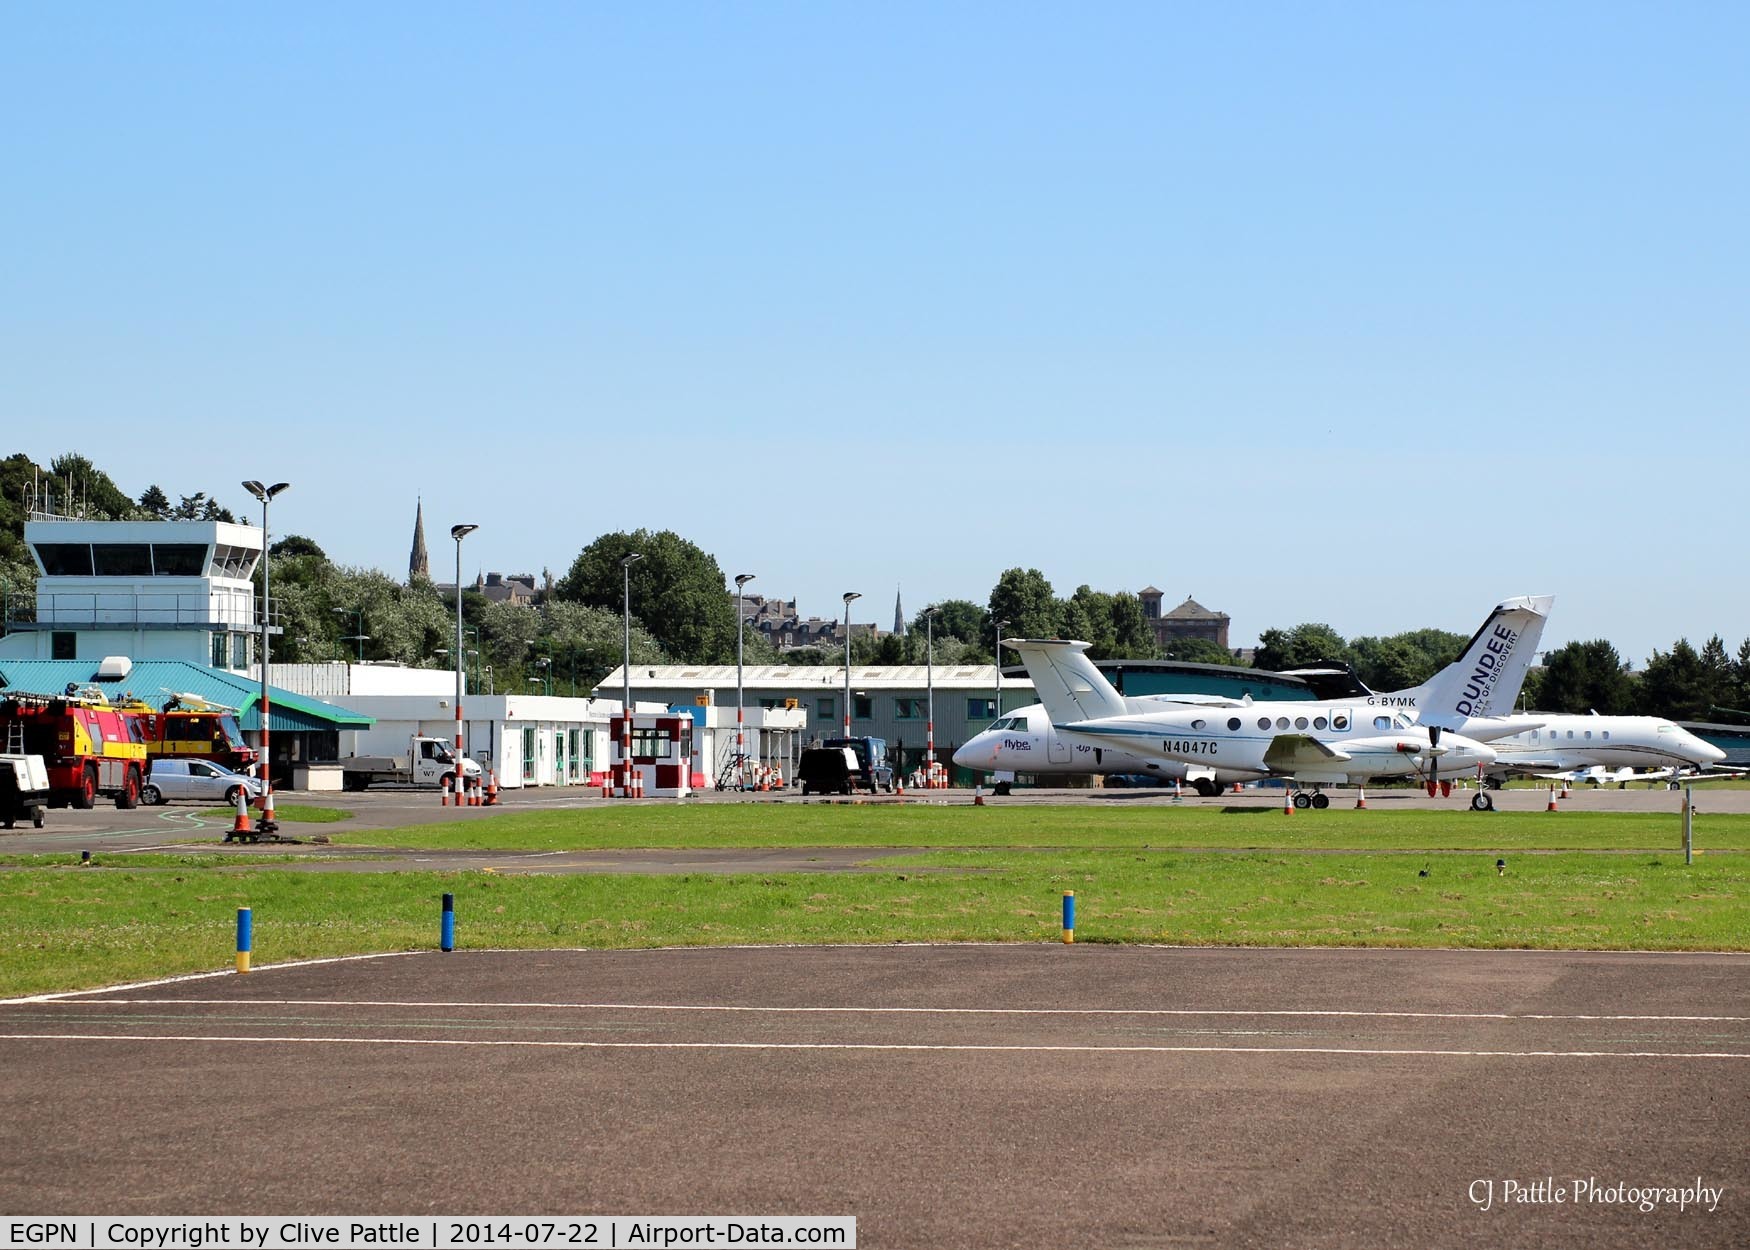 Dundee Airport, Dundee, Scotland United Kingdom (EGPN) - A fine day at Dundee Riverside EGPN